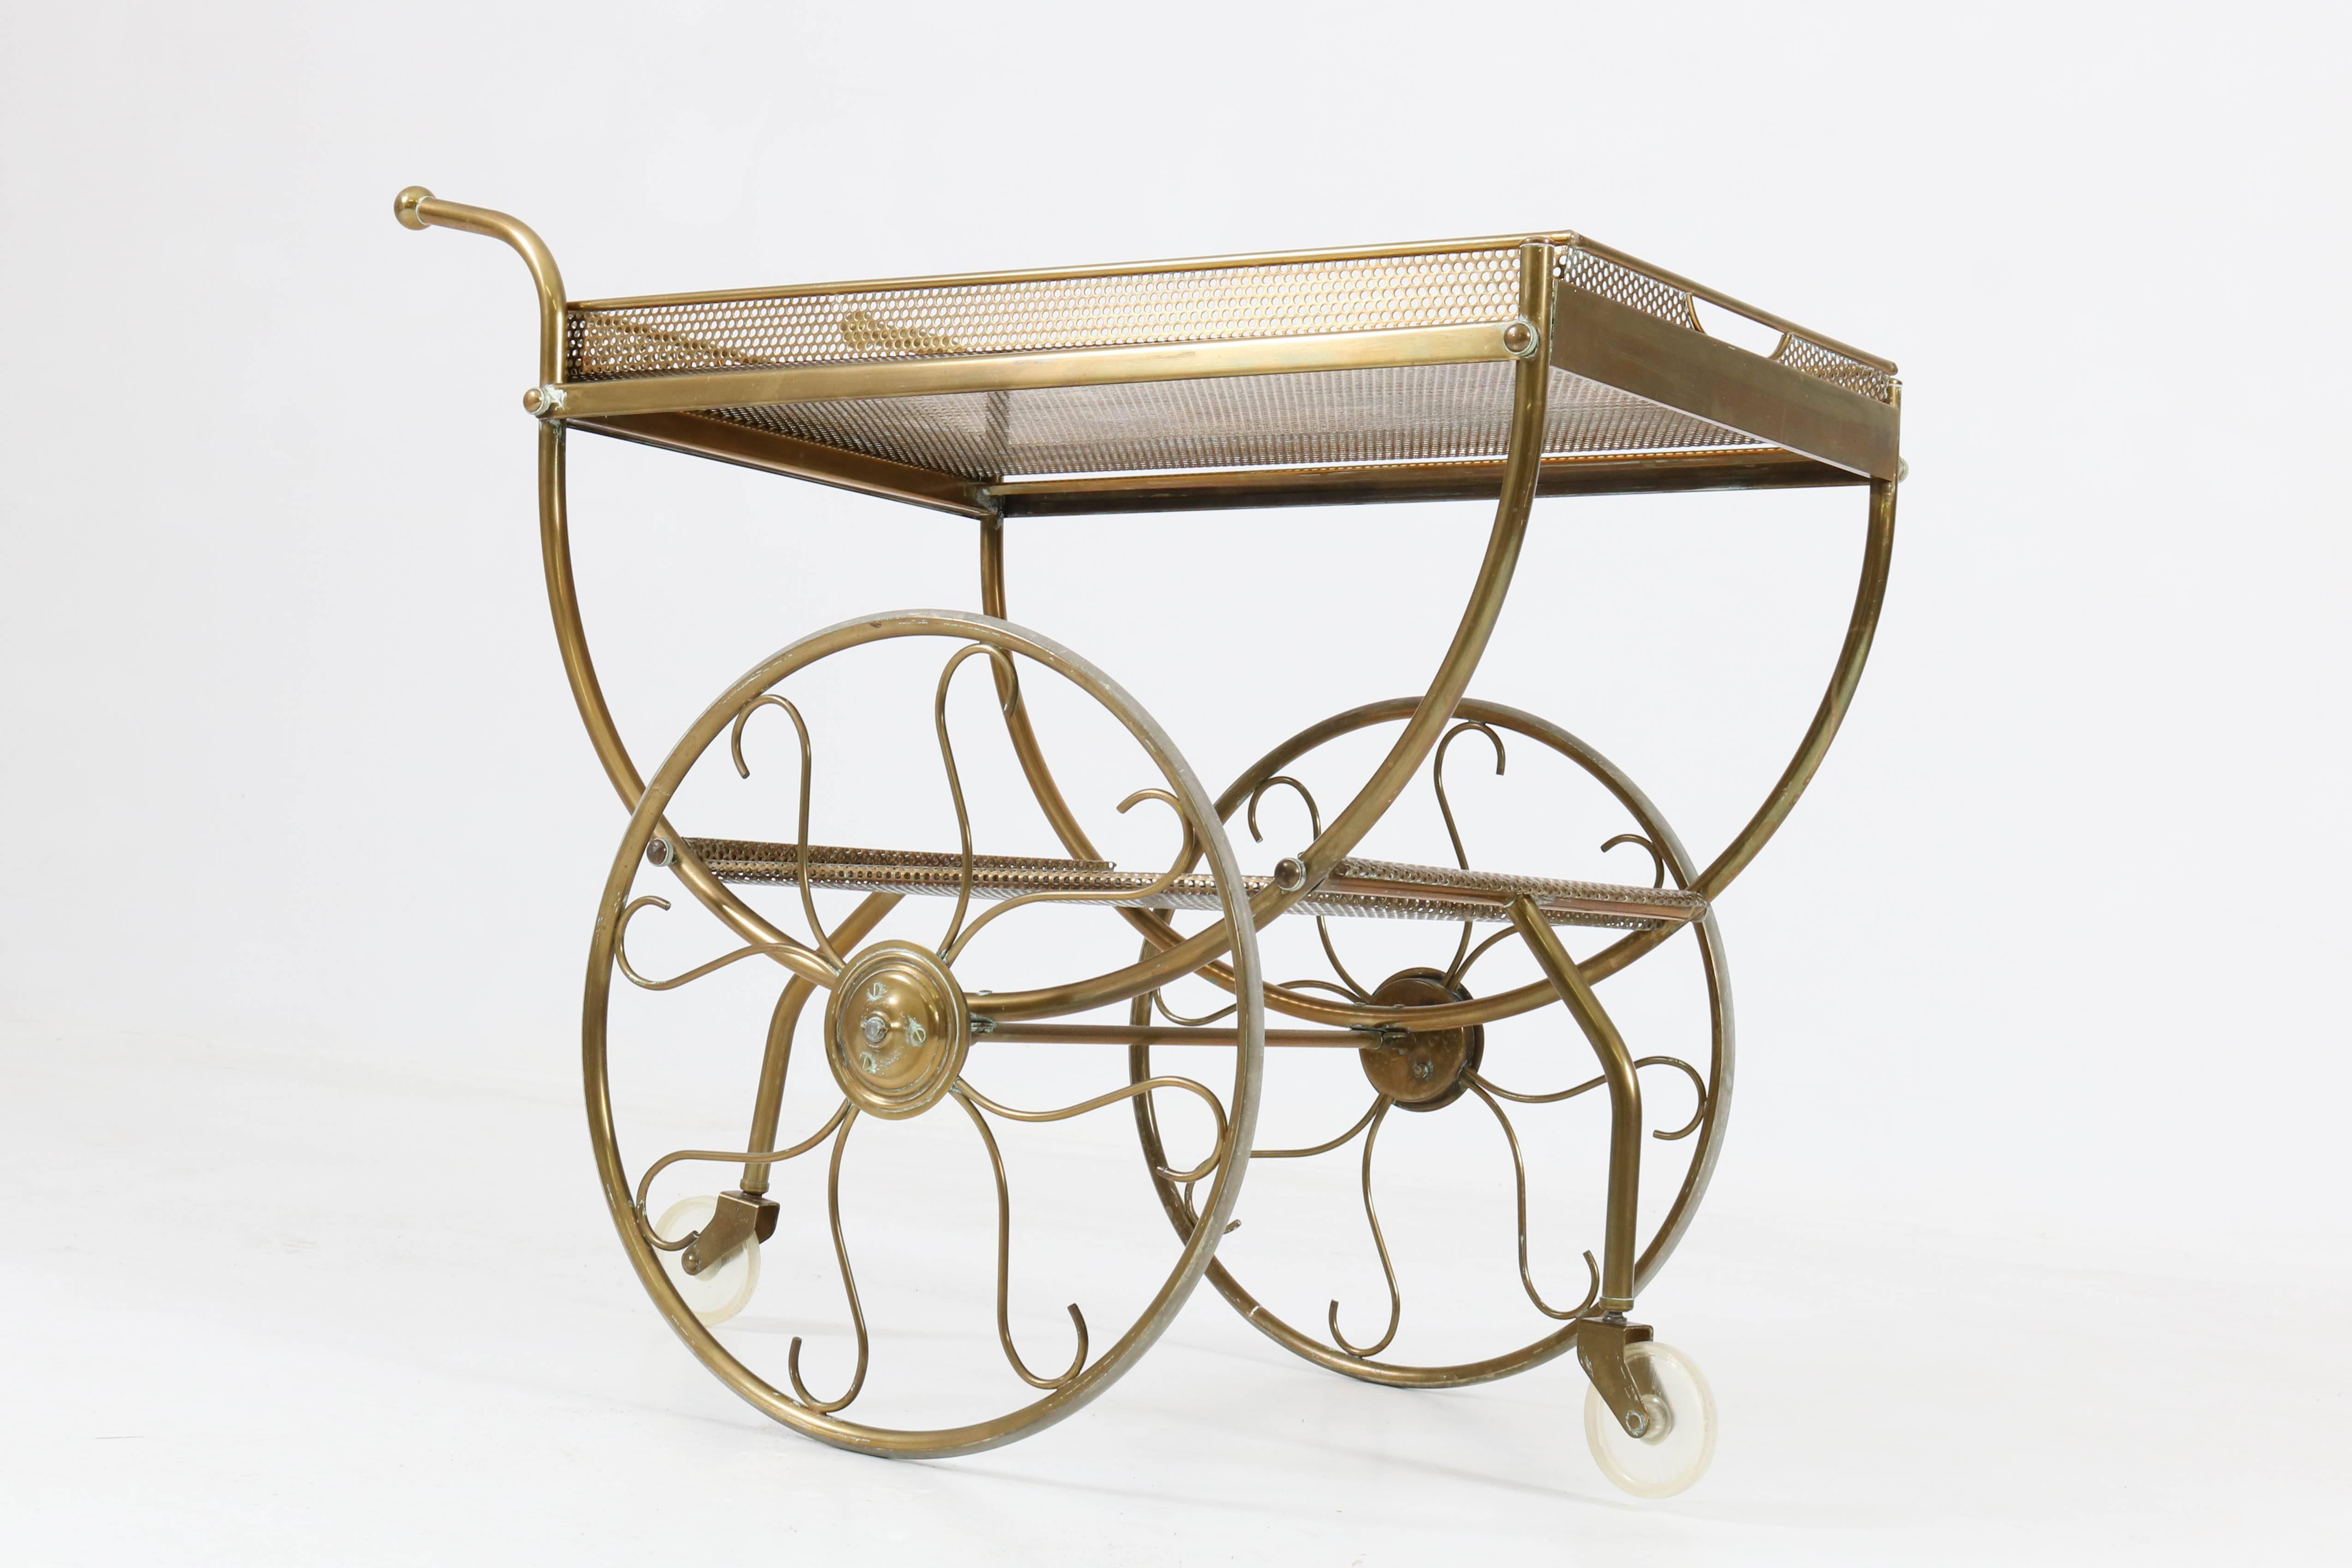 Hollywood Regency trolley or bar cart by Josef Frank for Svenskt Tenn Sweden, 1950s.
Tubular and perforated brass with original wheels.
In good original condition with minor wear consistent with age and use,
preserving a beautiful patina.